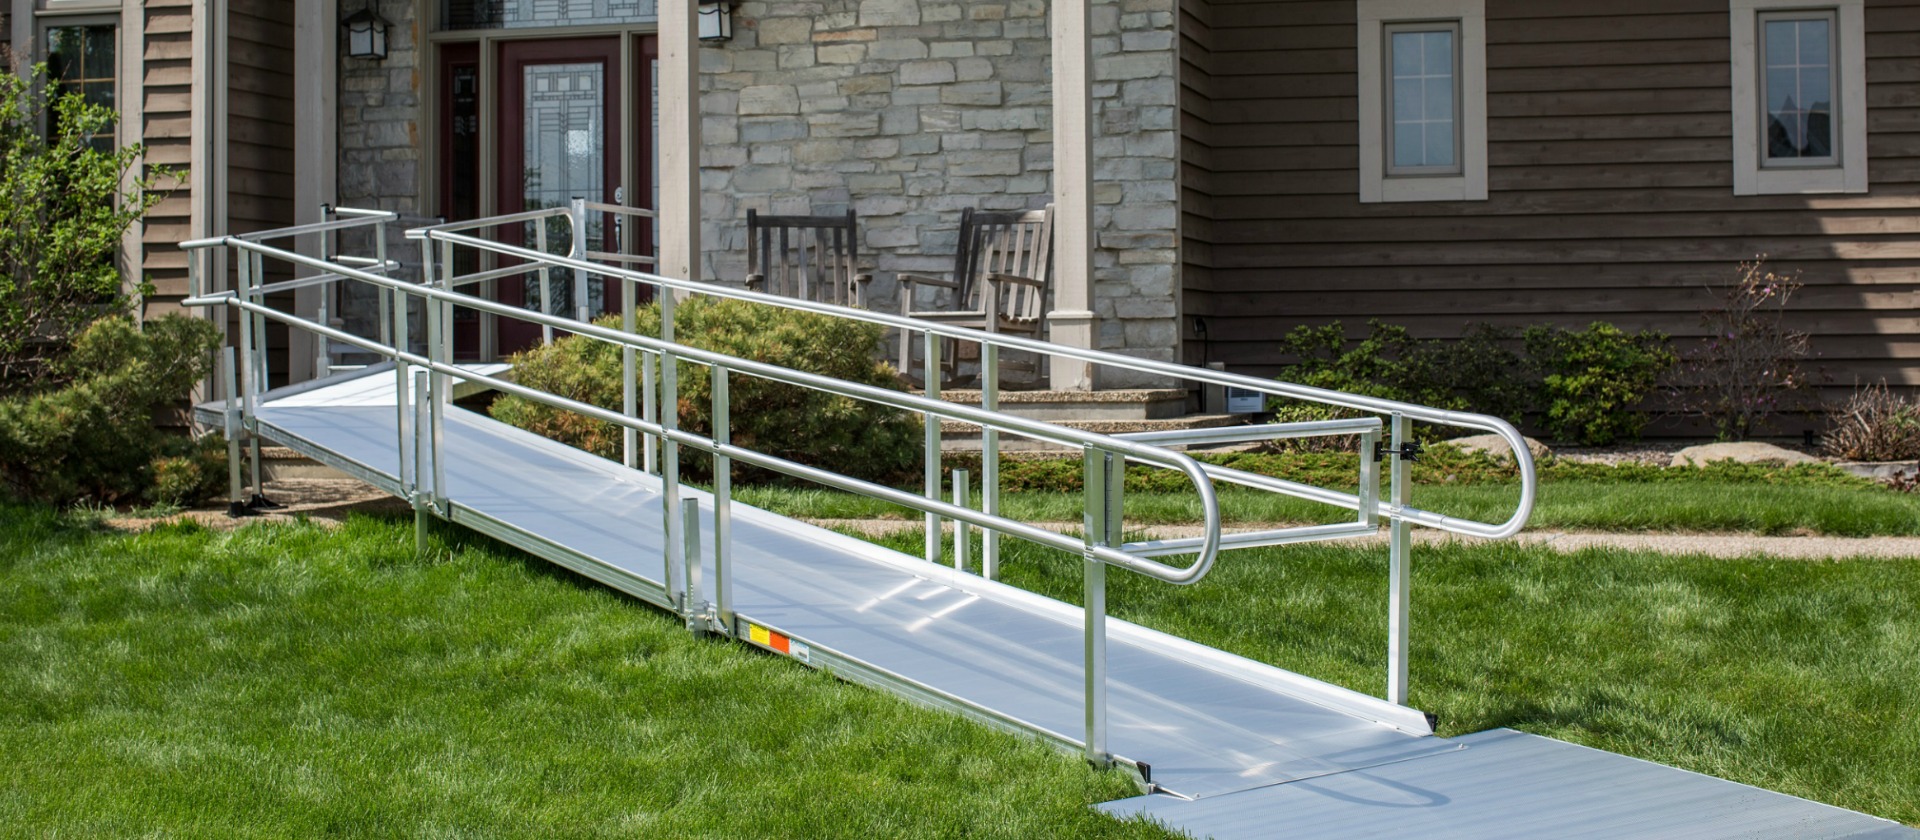 Michigan Wheelchair Ramp Al And, What Are The Regulations For Wheelchair Ramps In Michigan